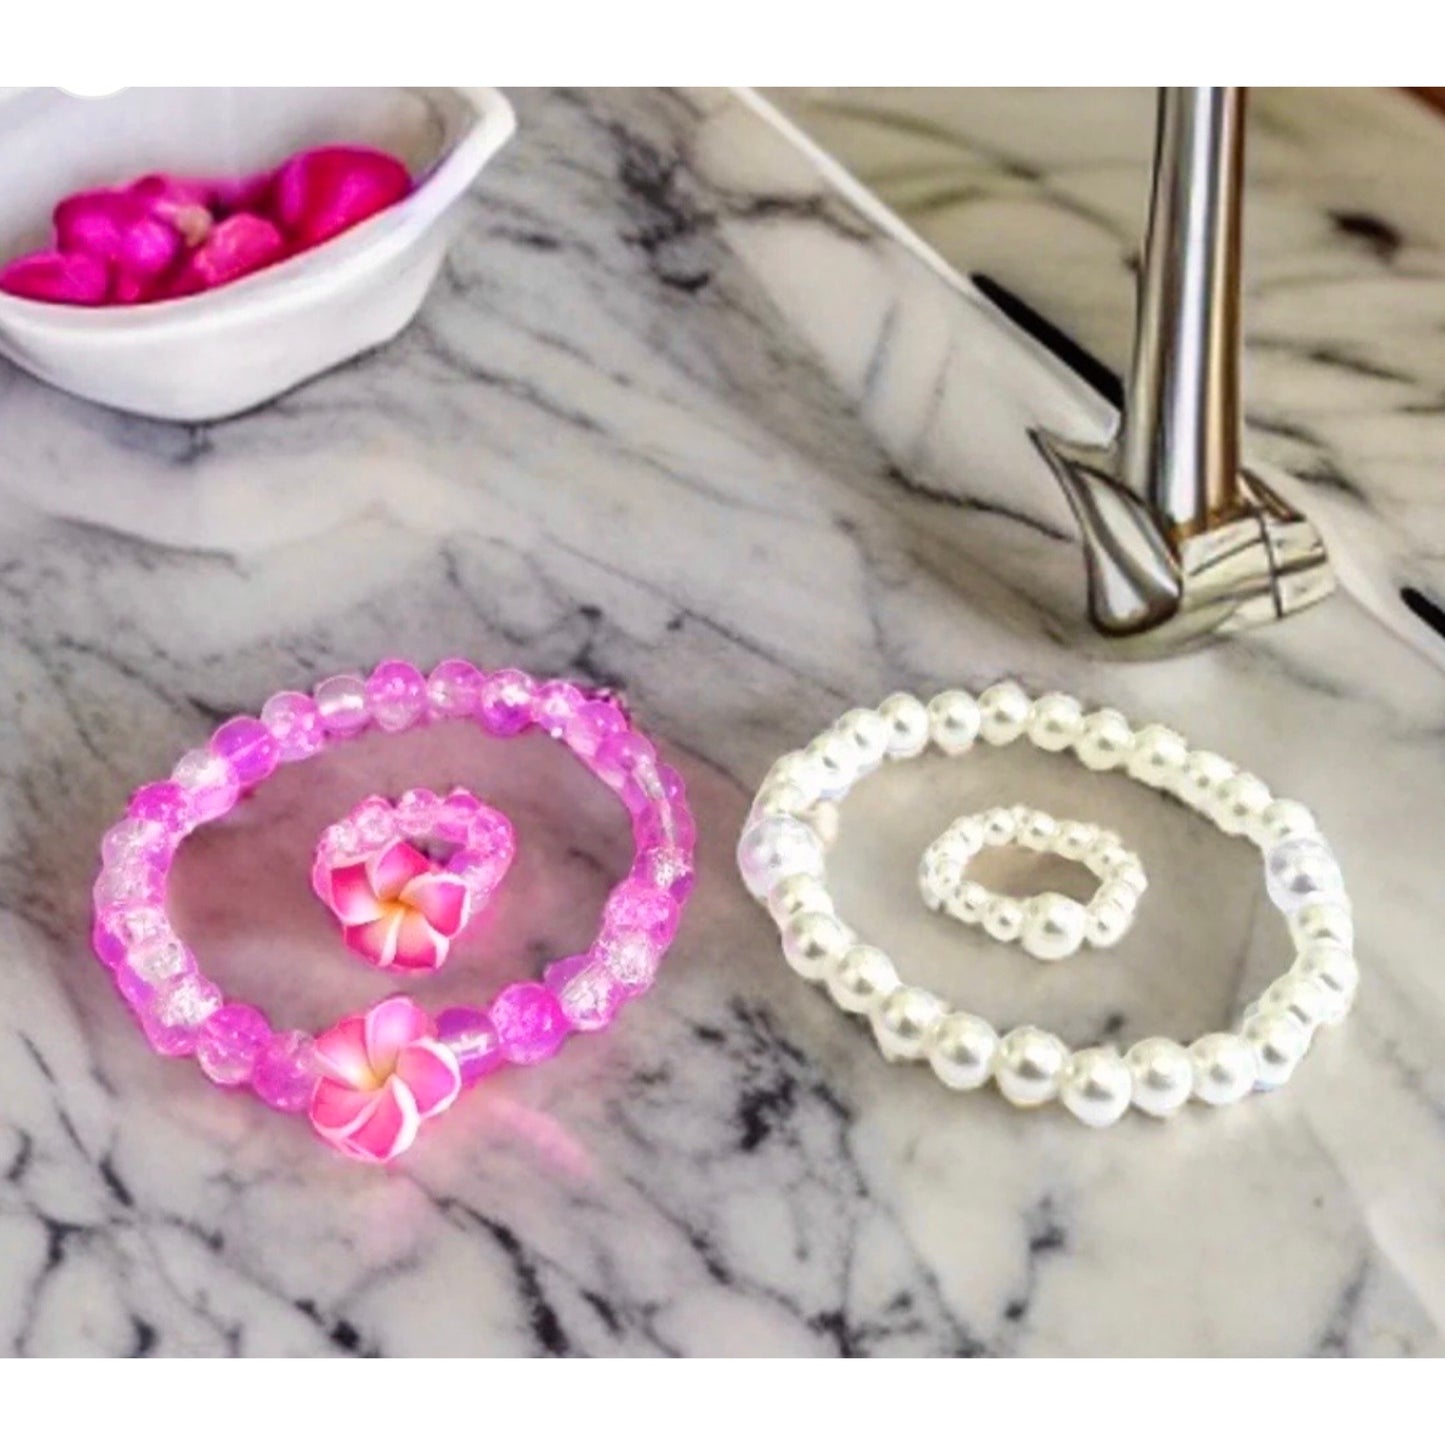 Handmade 4 Pieces stretchable baby bracelets and ring sets